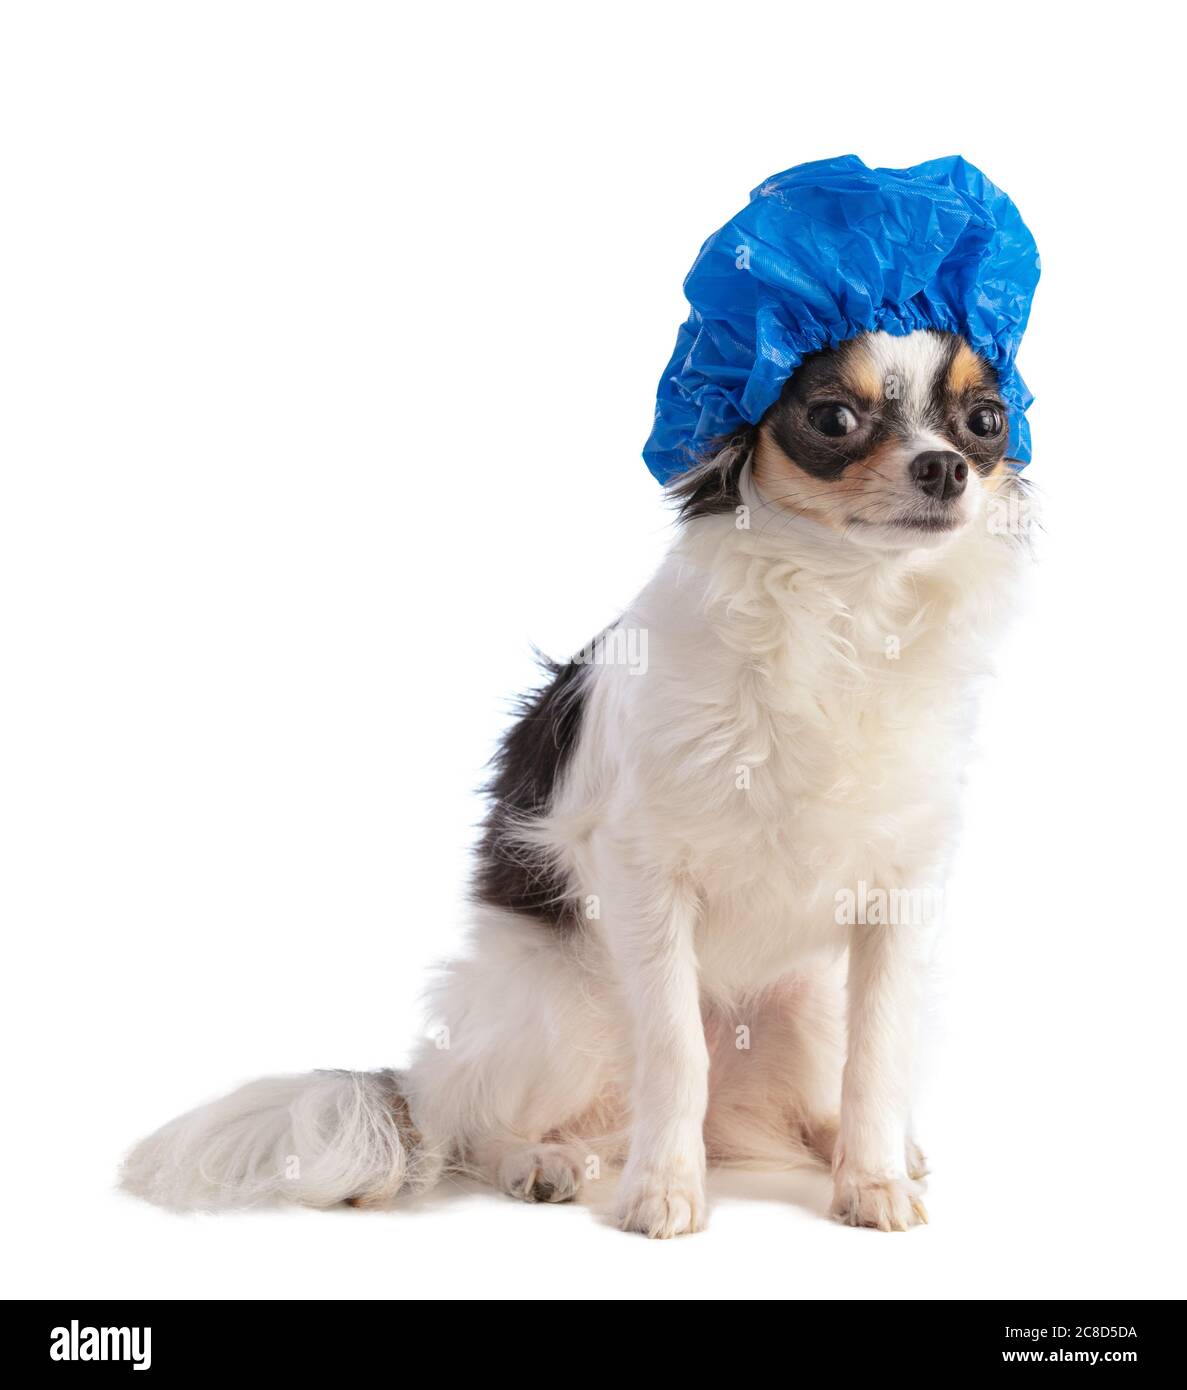 Chihuahua with blue bathing cap on white background Stock Photo